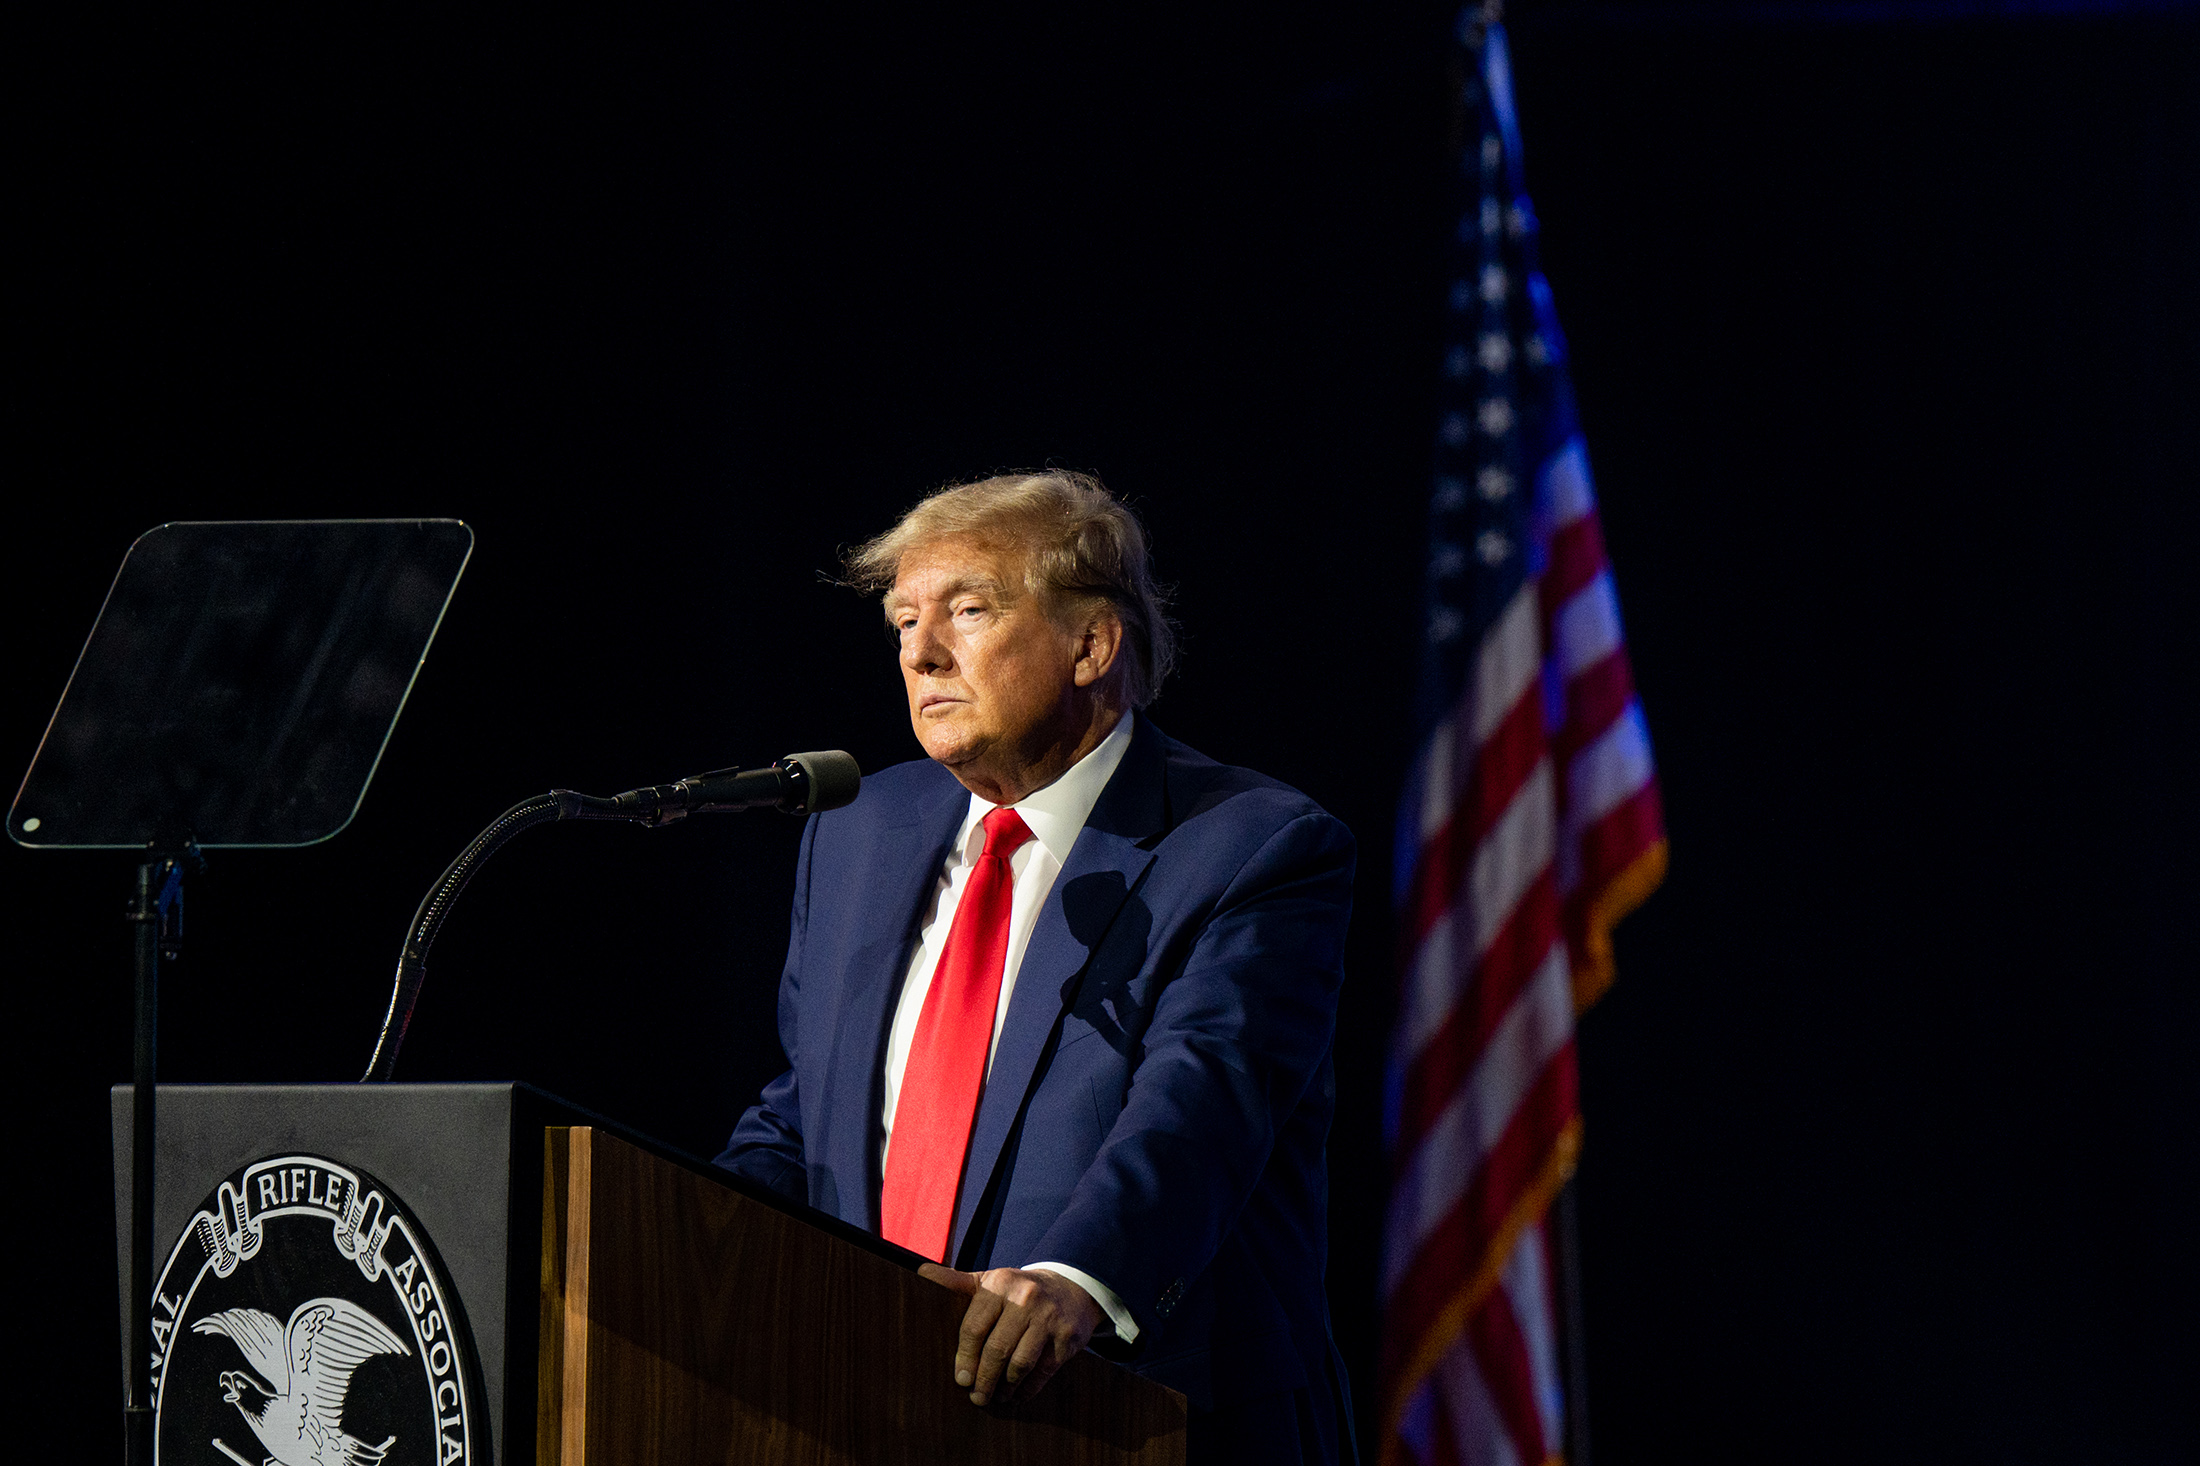 Donald Trump speaks during the NRA annual convention at the George R. Brown Convention Center in Houston, Texas, on May 27.